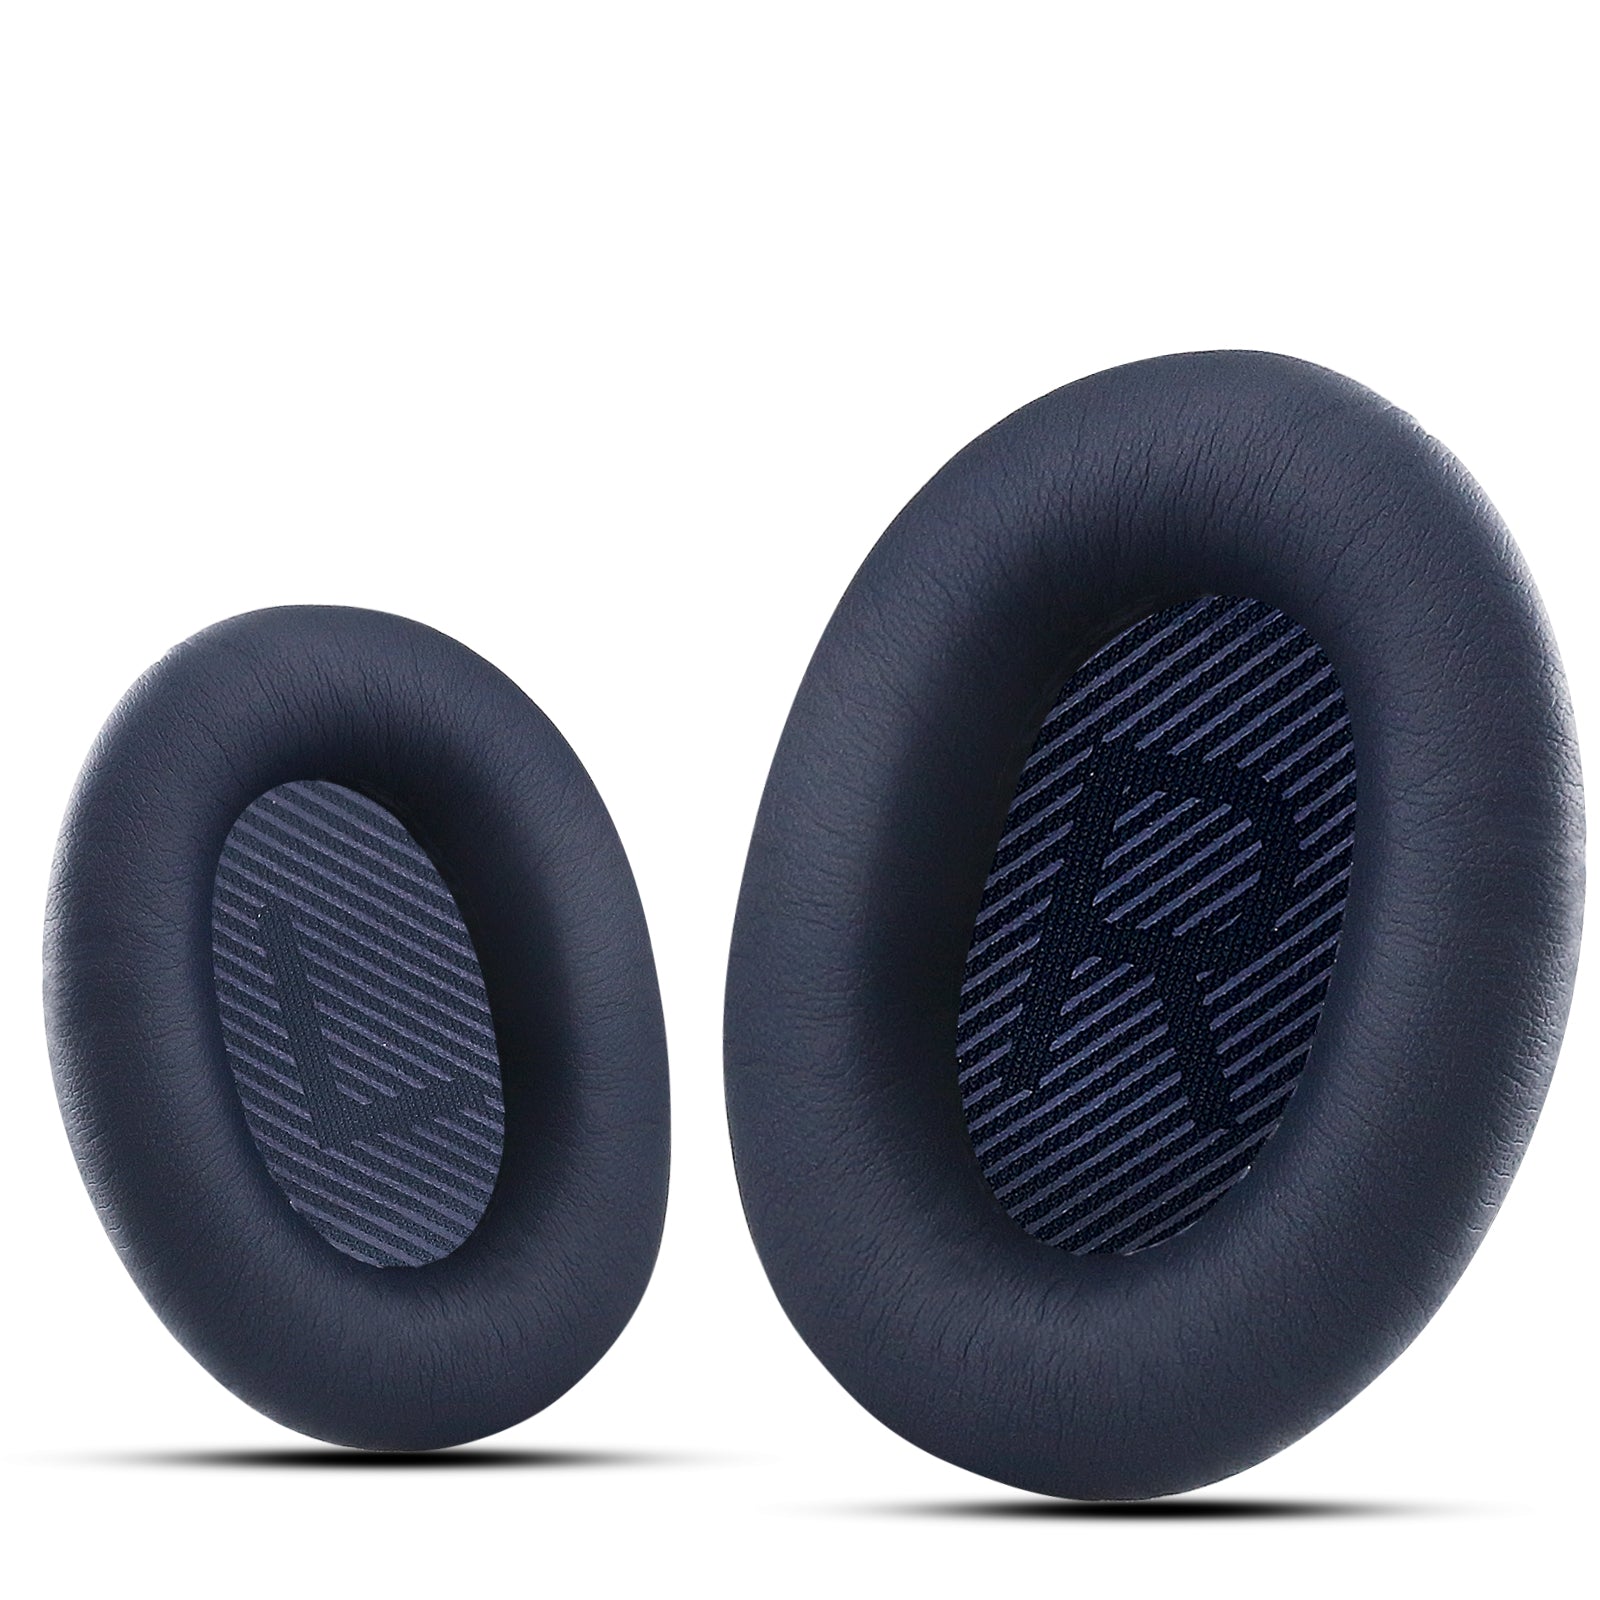 Professional Replacement Earpads Replacement for Bose Headphones